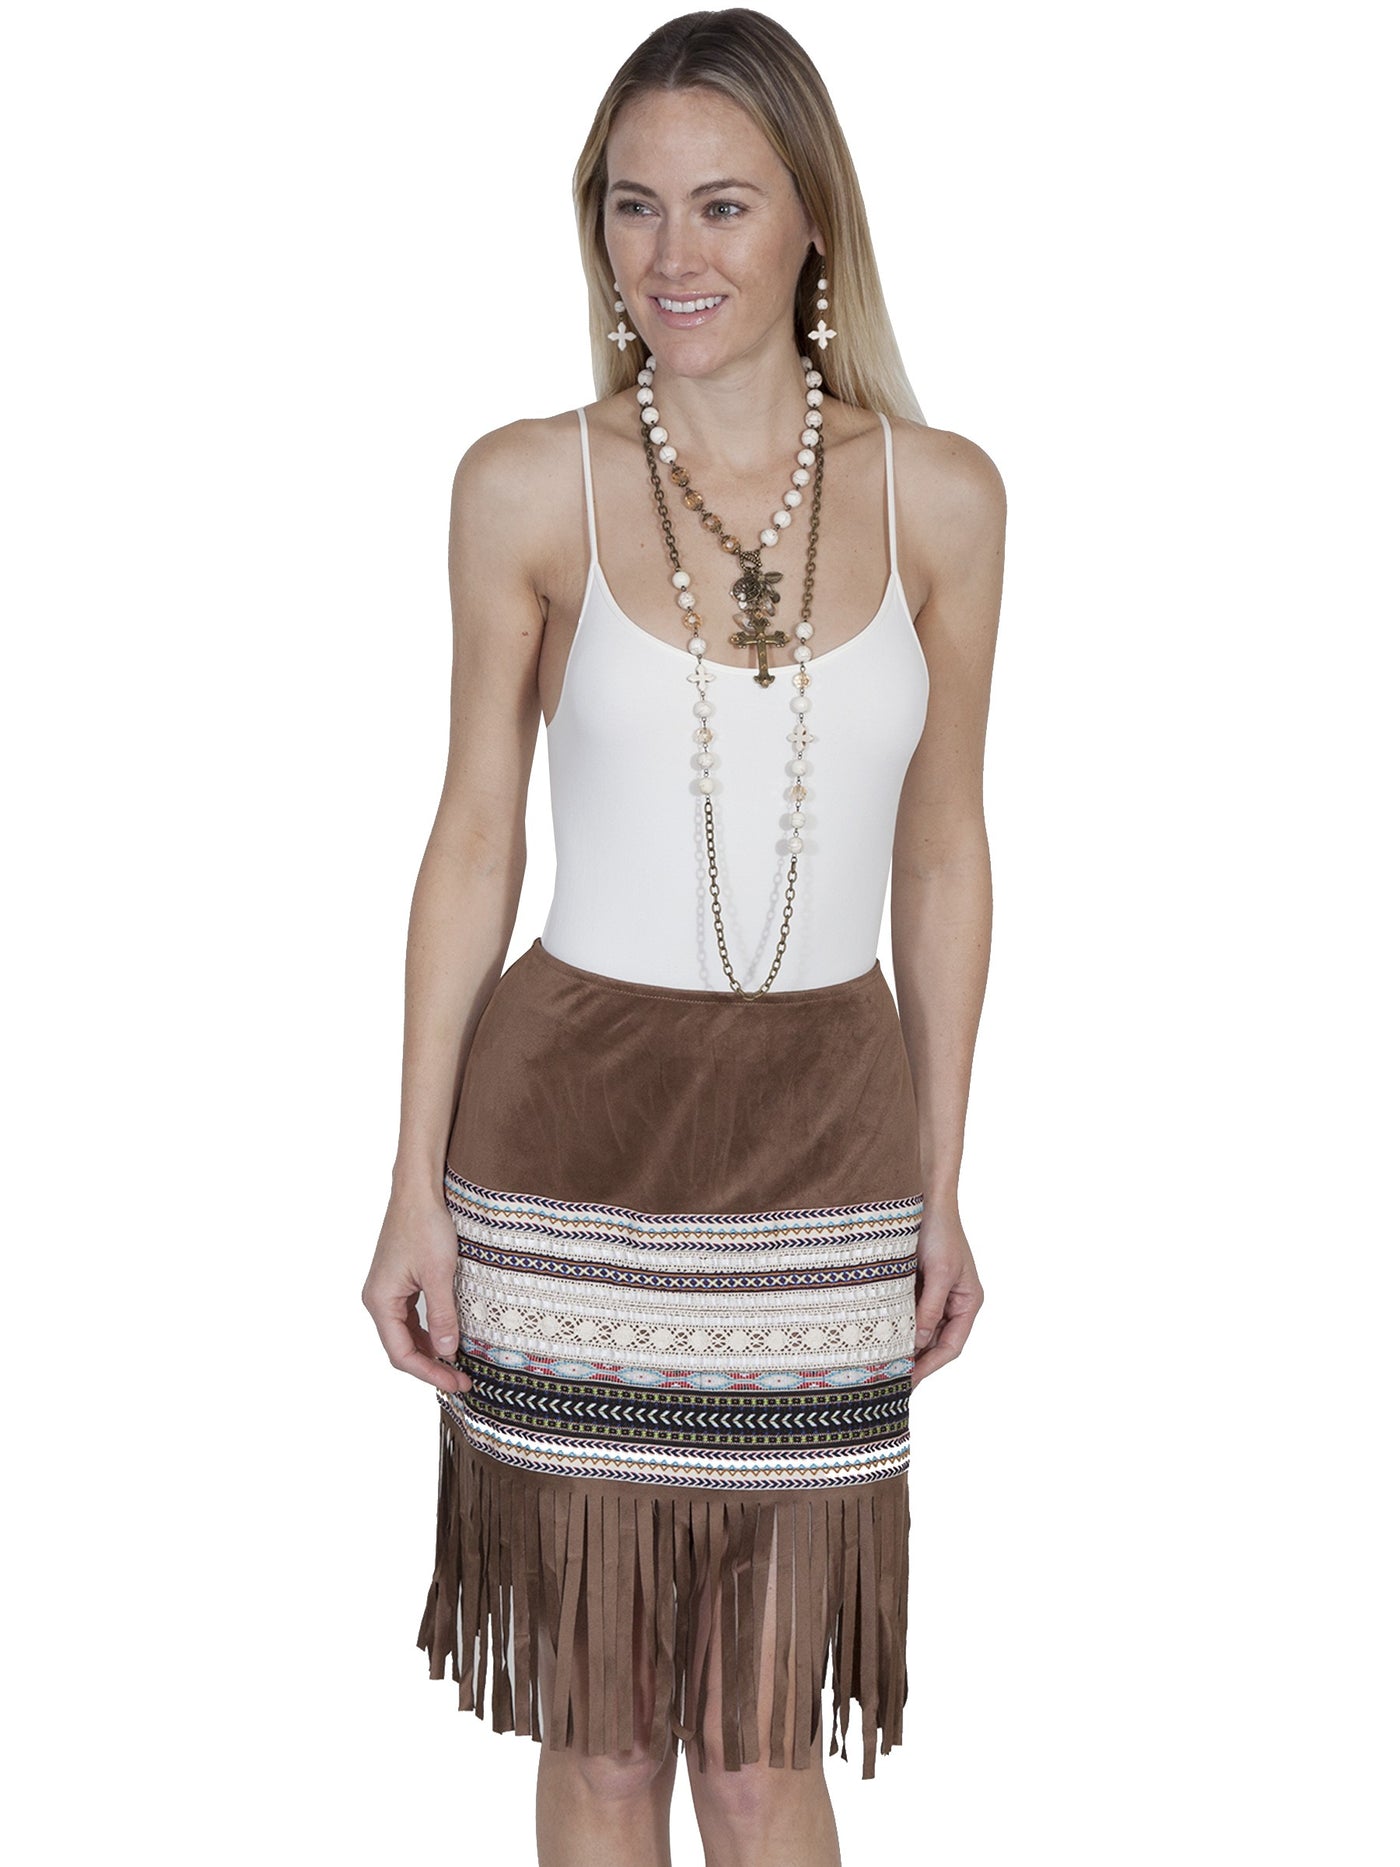 Western Style Short Fringe Skirt in Tan - SOLD OUT